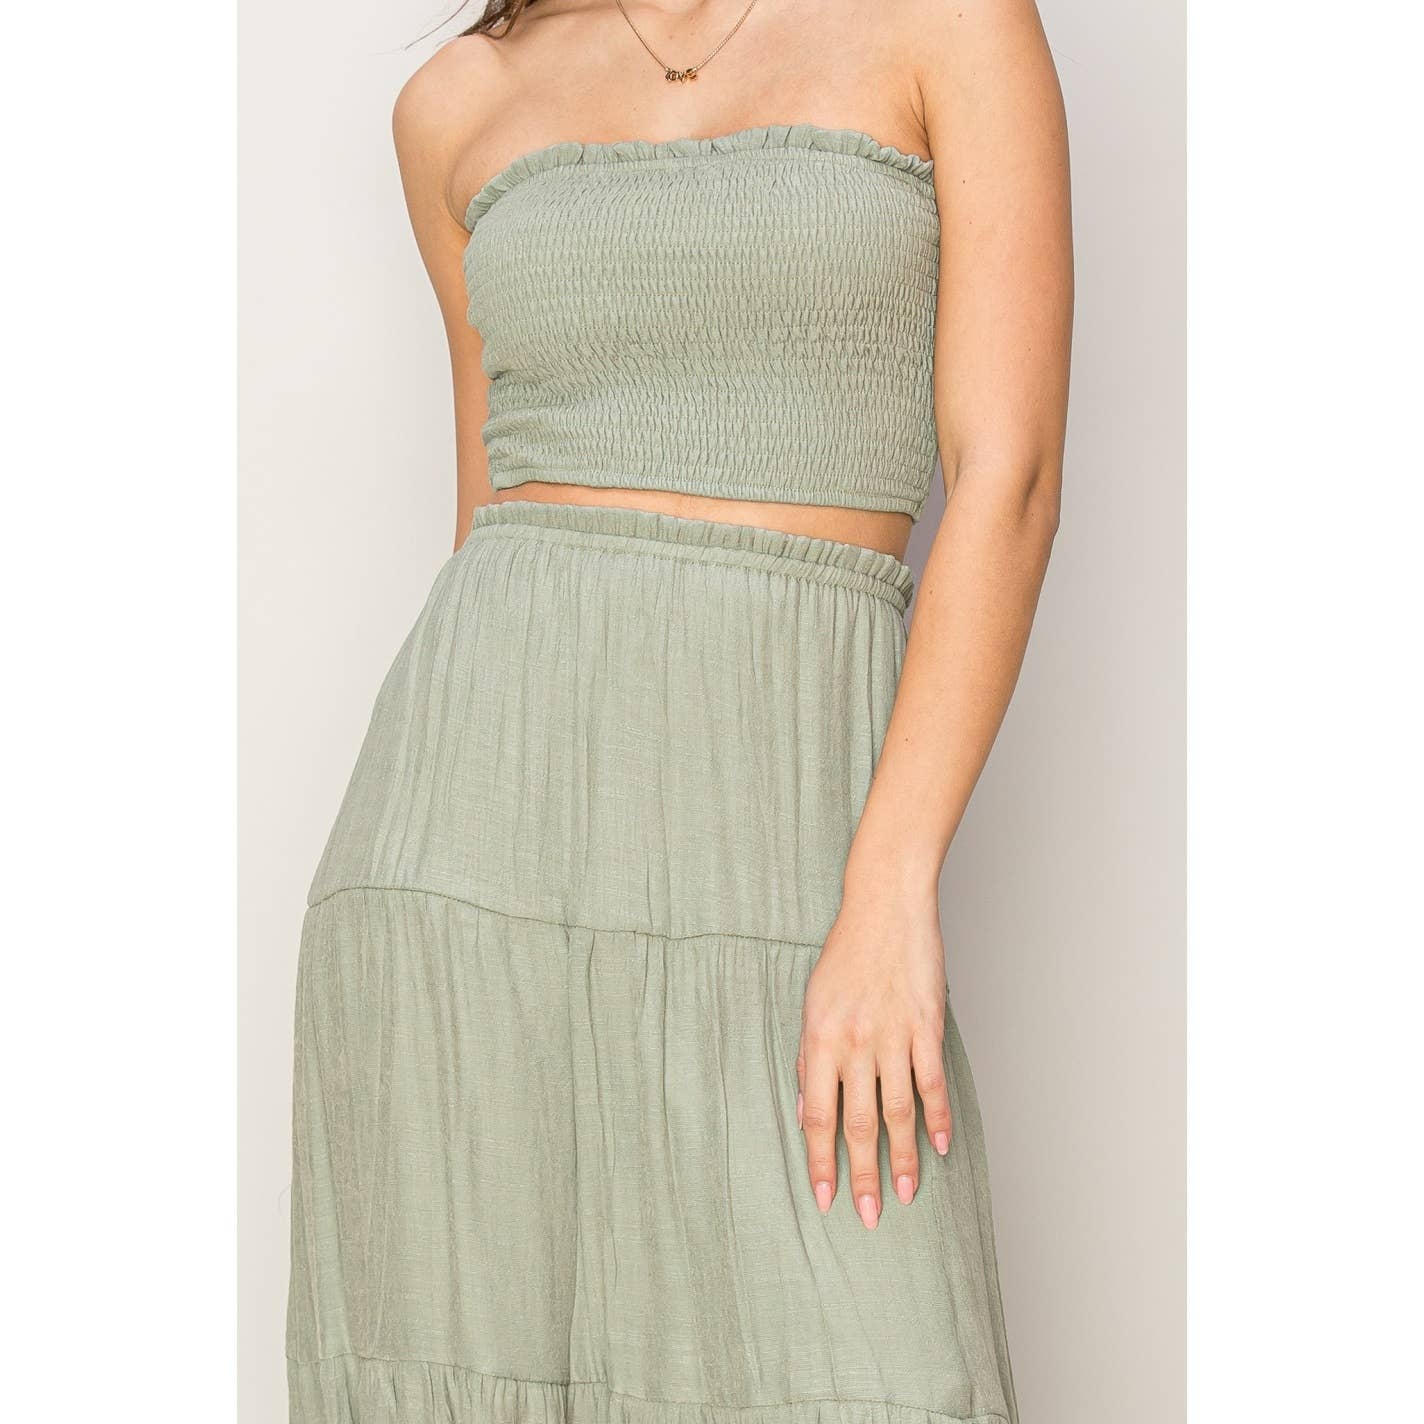 TUBE TOP AND TIERED MAXI SKIRT SET: TEA OLIVE